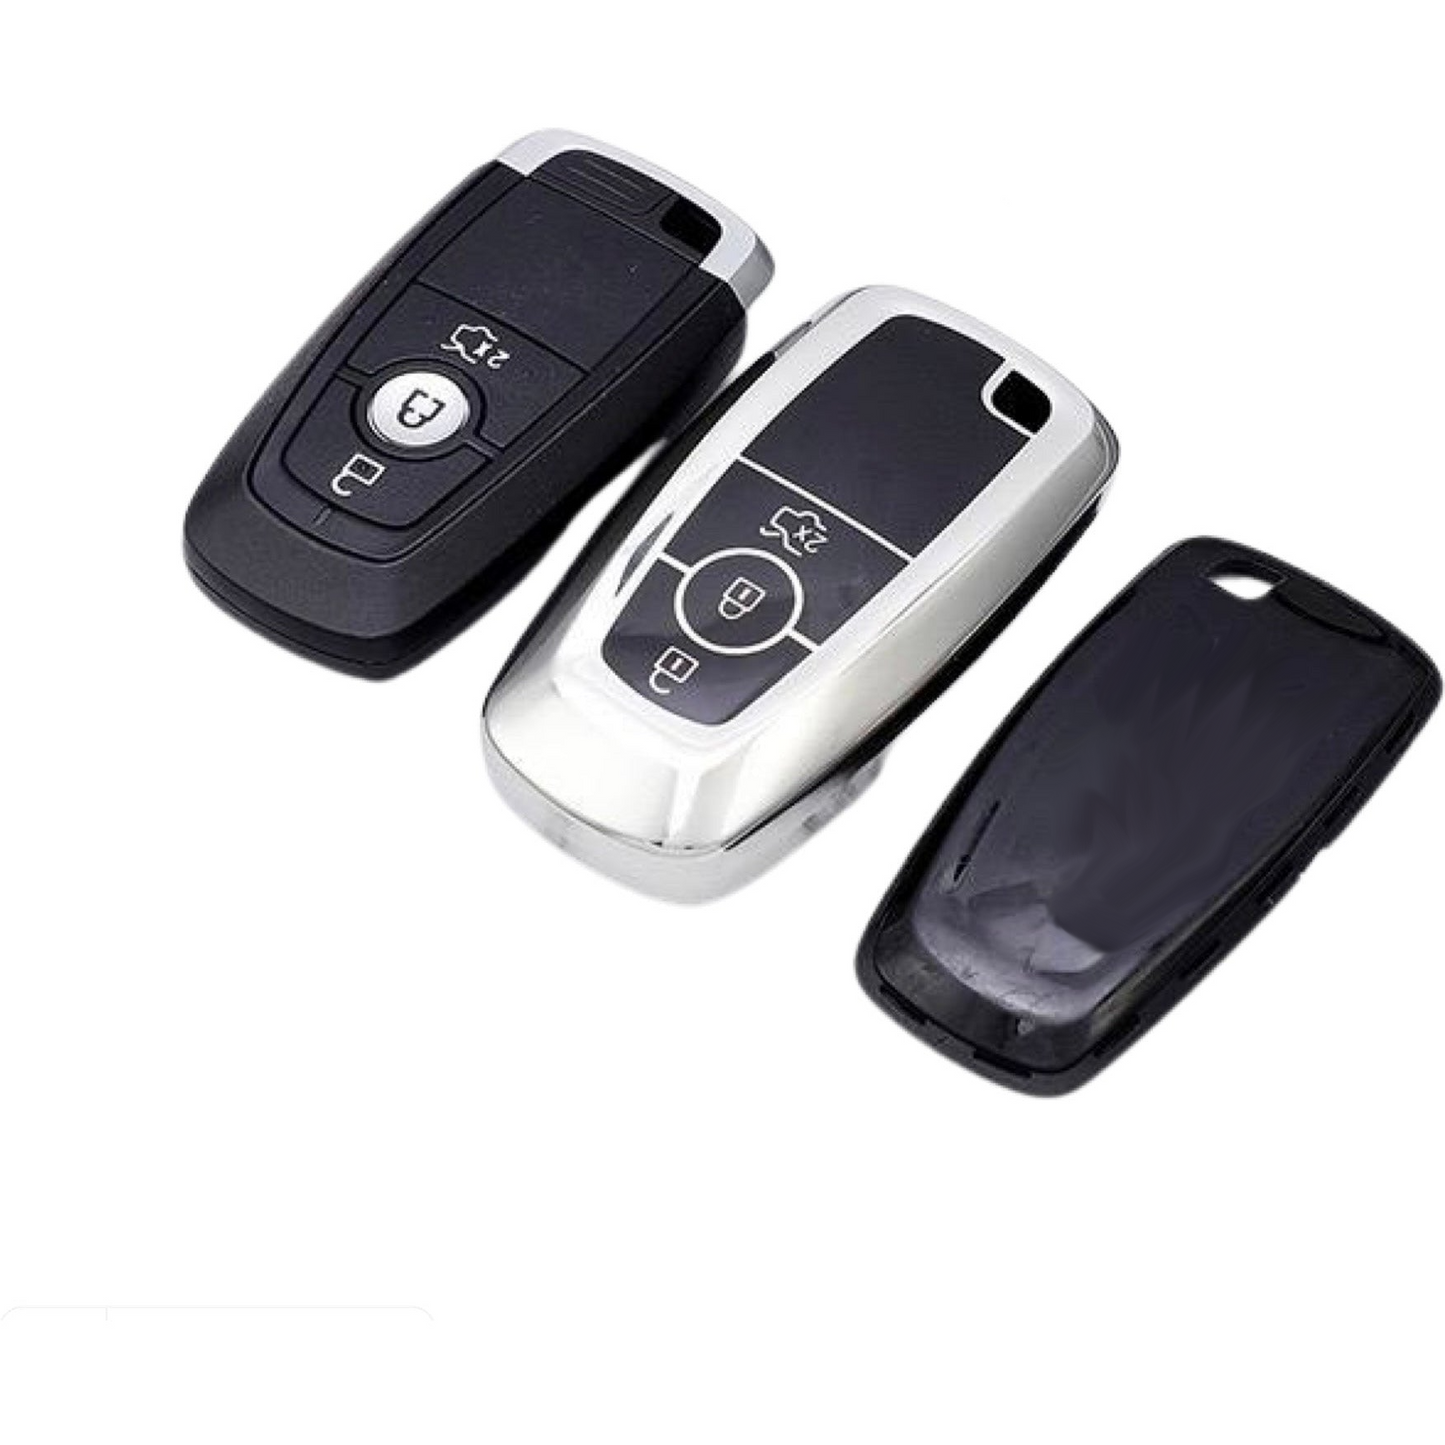 Ford Key Cover for Mustang, Ranger, Escape | Volkswagen Amarok | Keysleeves key fob covers